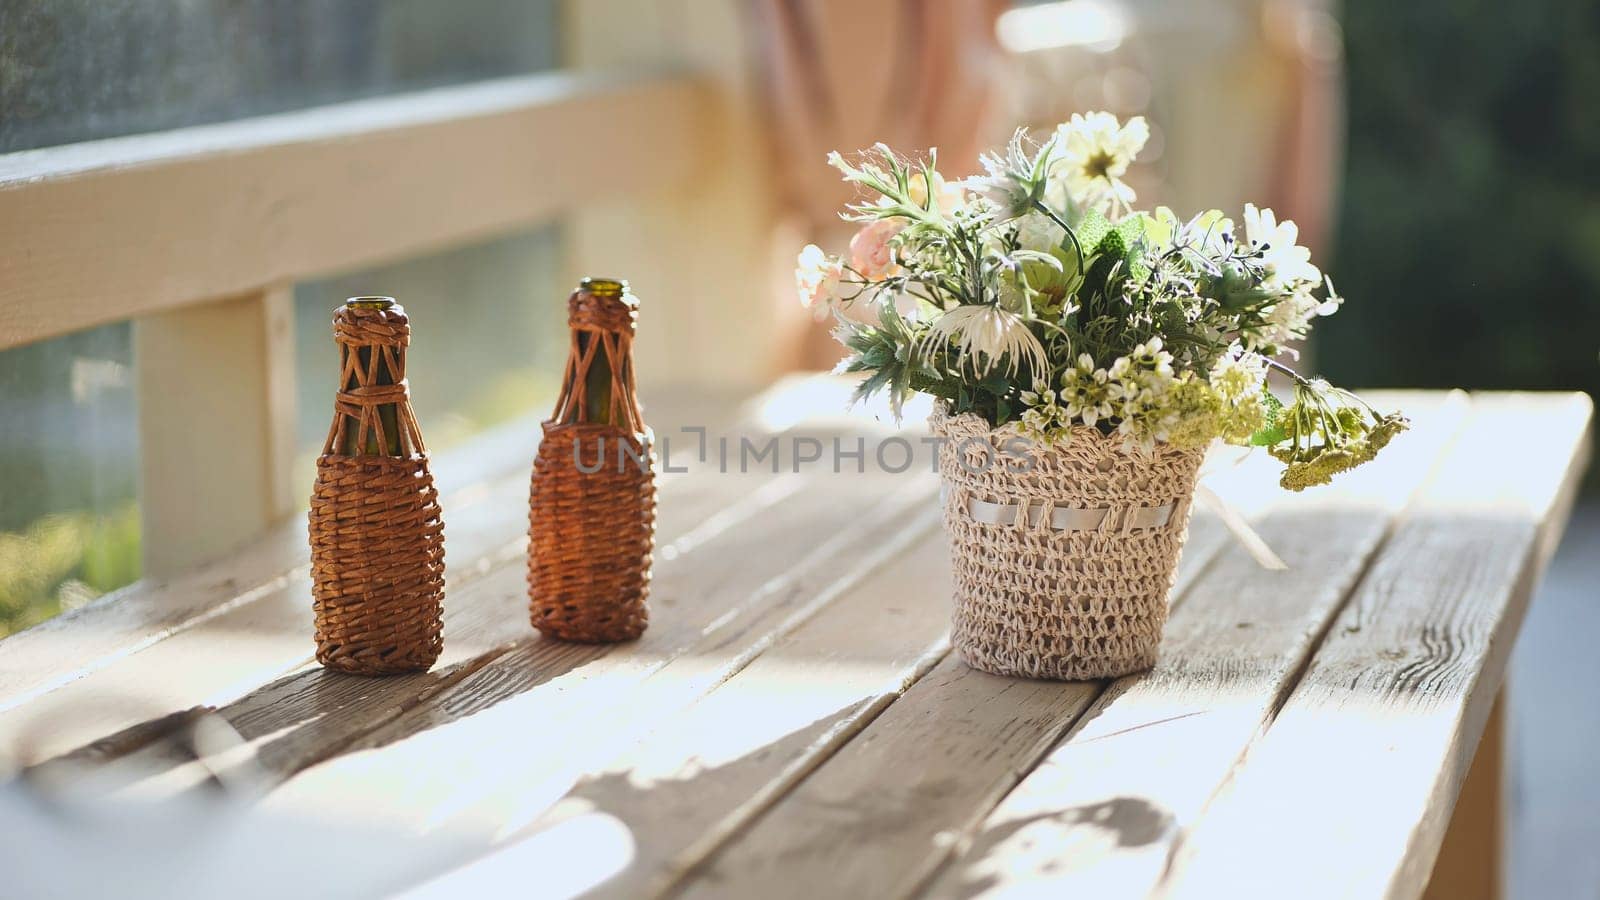 A vase of flowers on a table outside